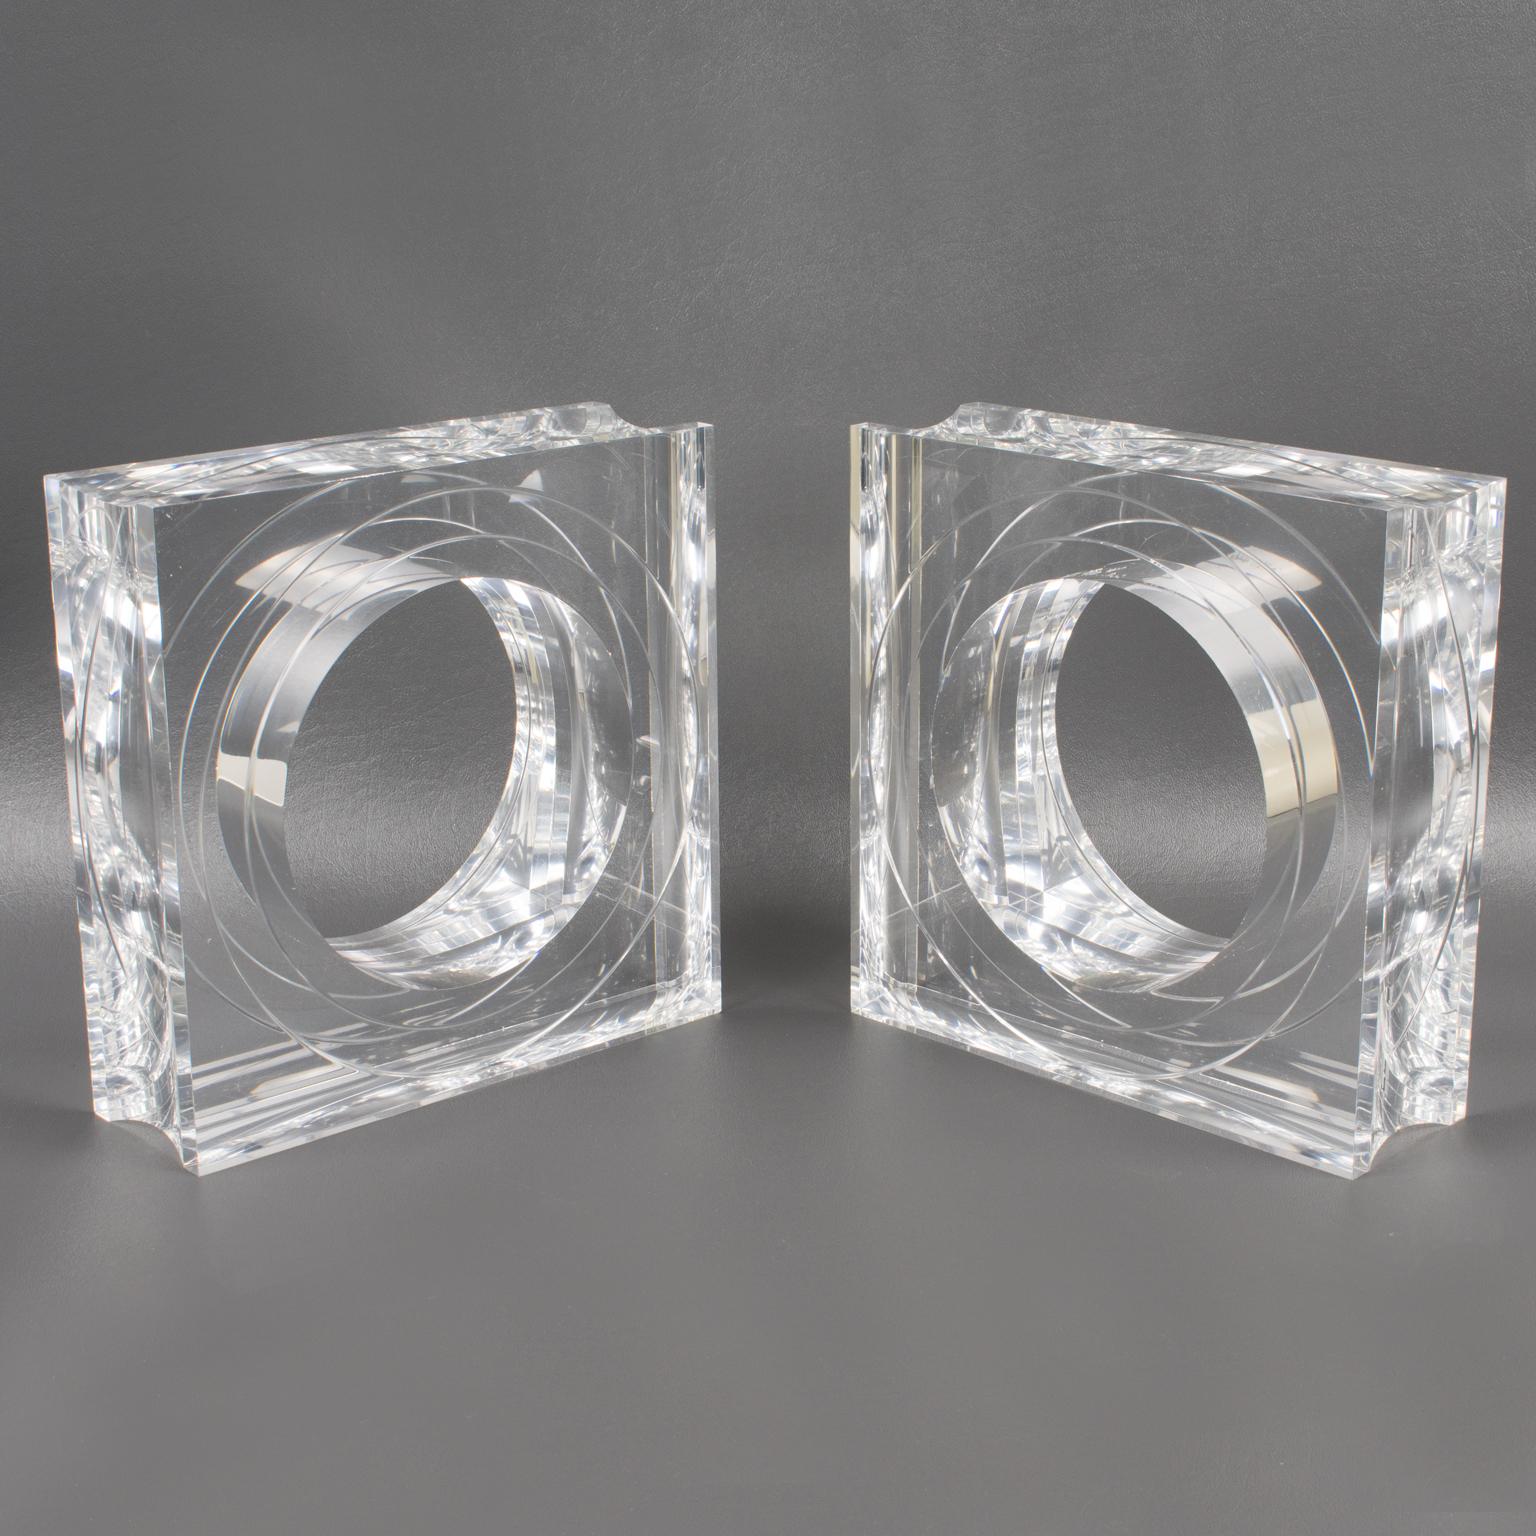 Stunning geometric Lucite bookends designed by Felice Antonio Botta, Firenze, Italy. Elegant 1970s modernist shape with incredible 